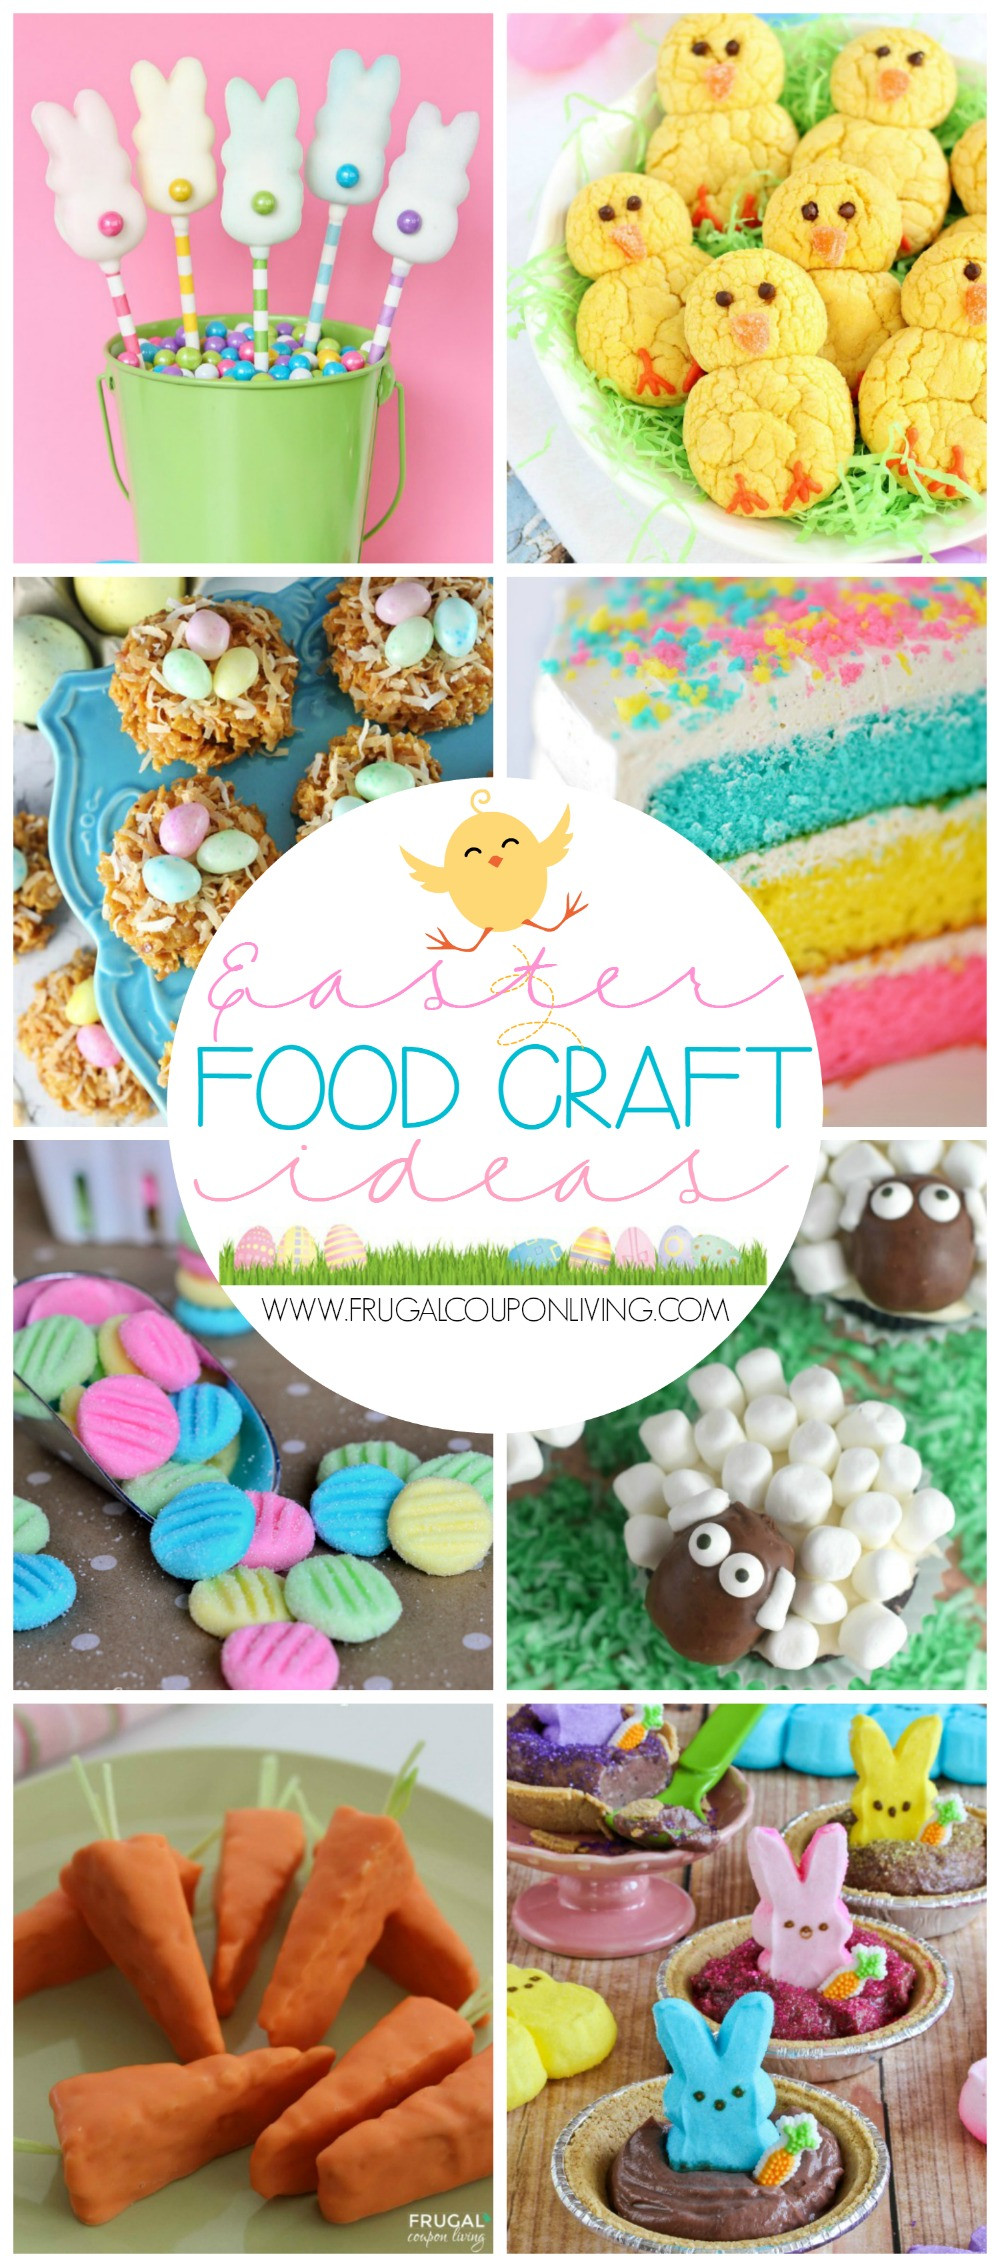 Easter Cooking Ideas
 Easter Egg Dying Ideas Think Outside the Carton